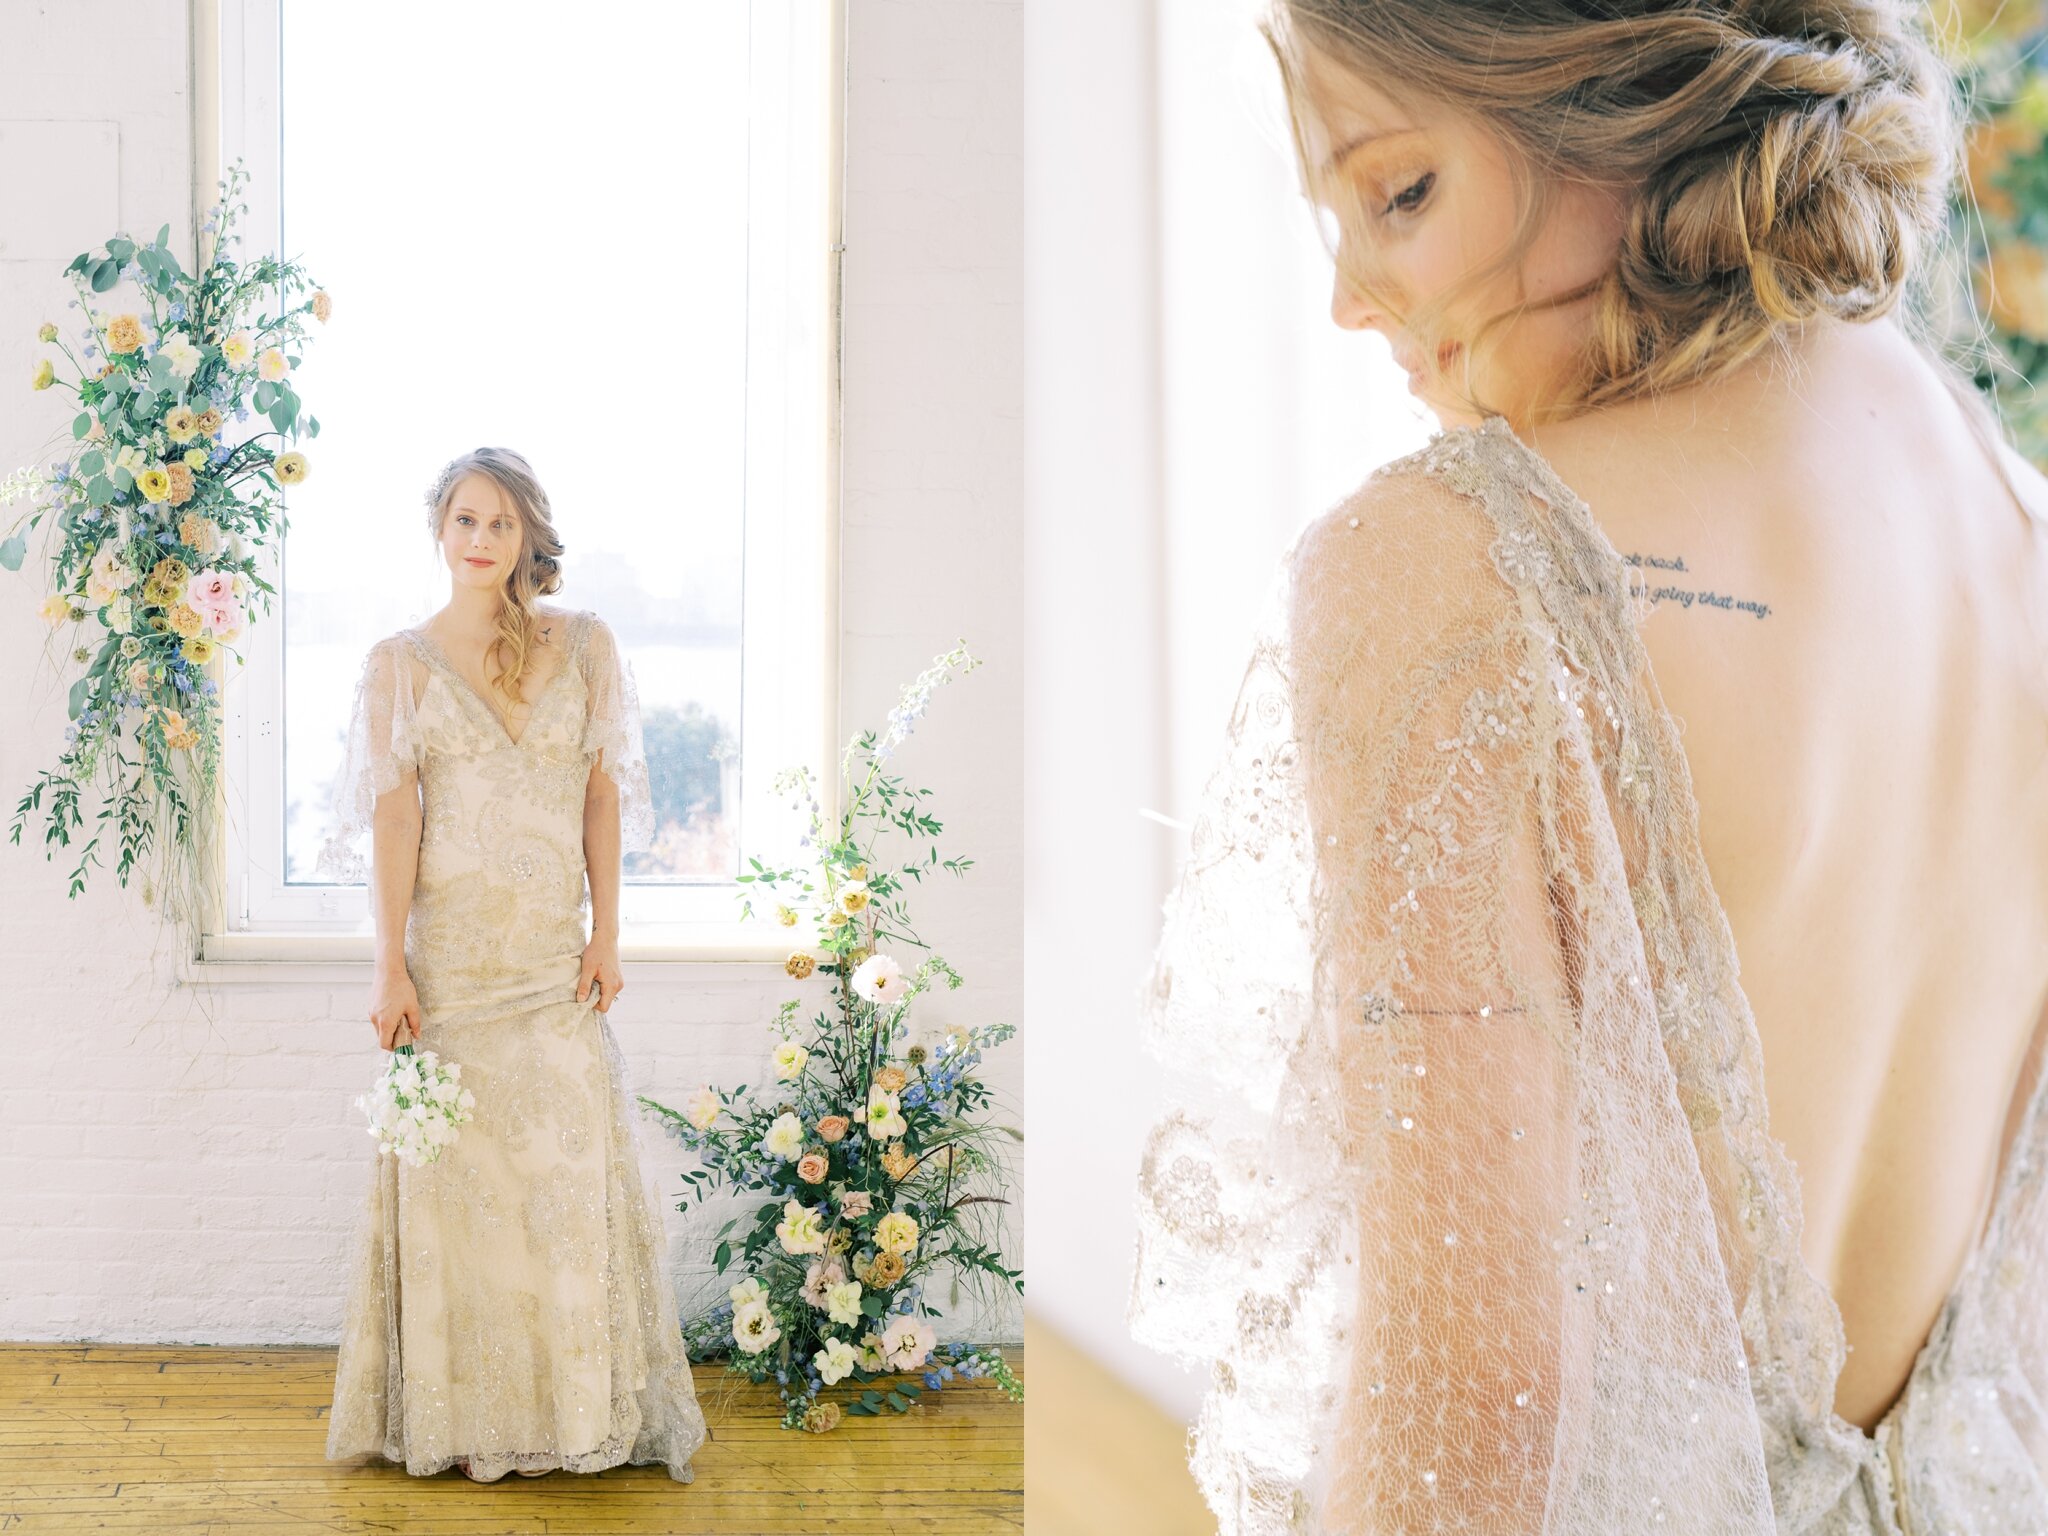 Close up of Bride wearing lace wedding dress